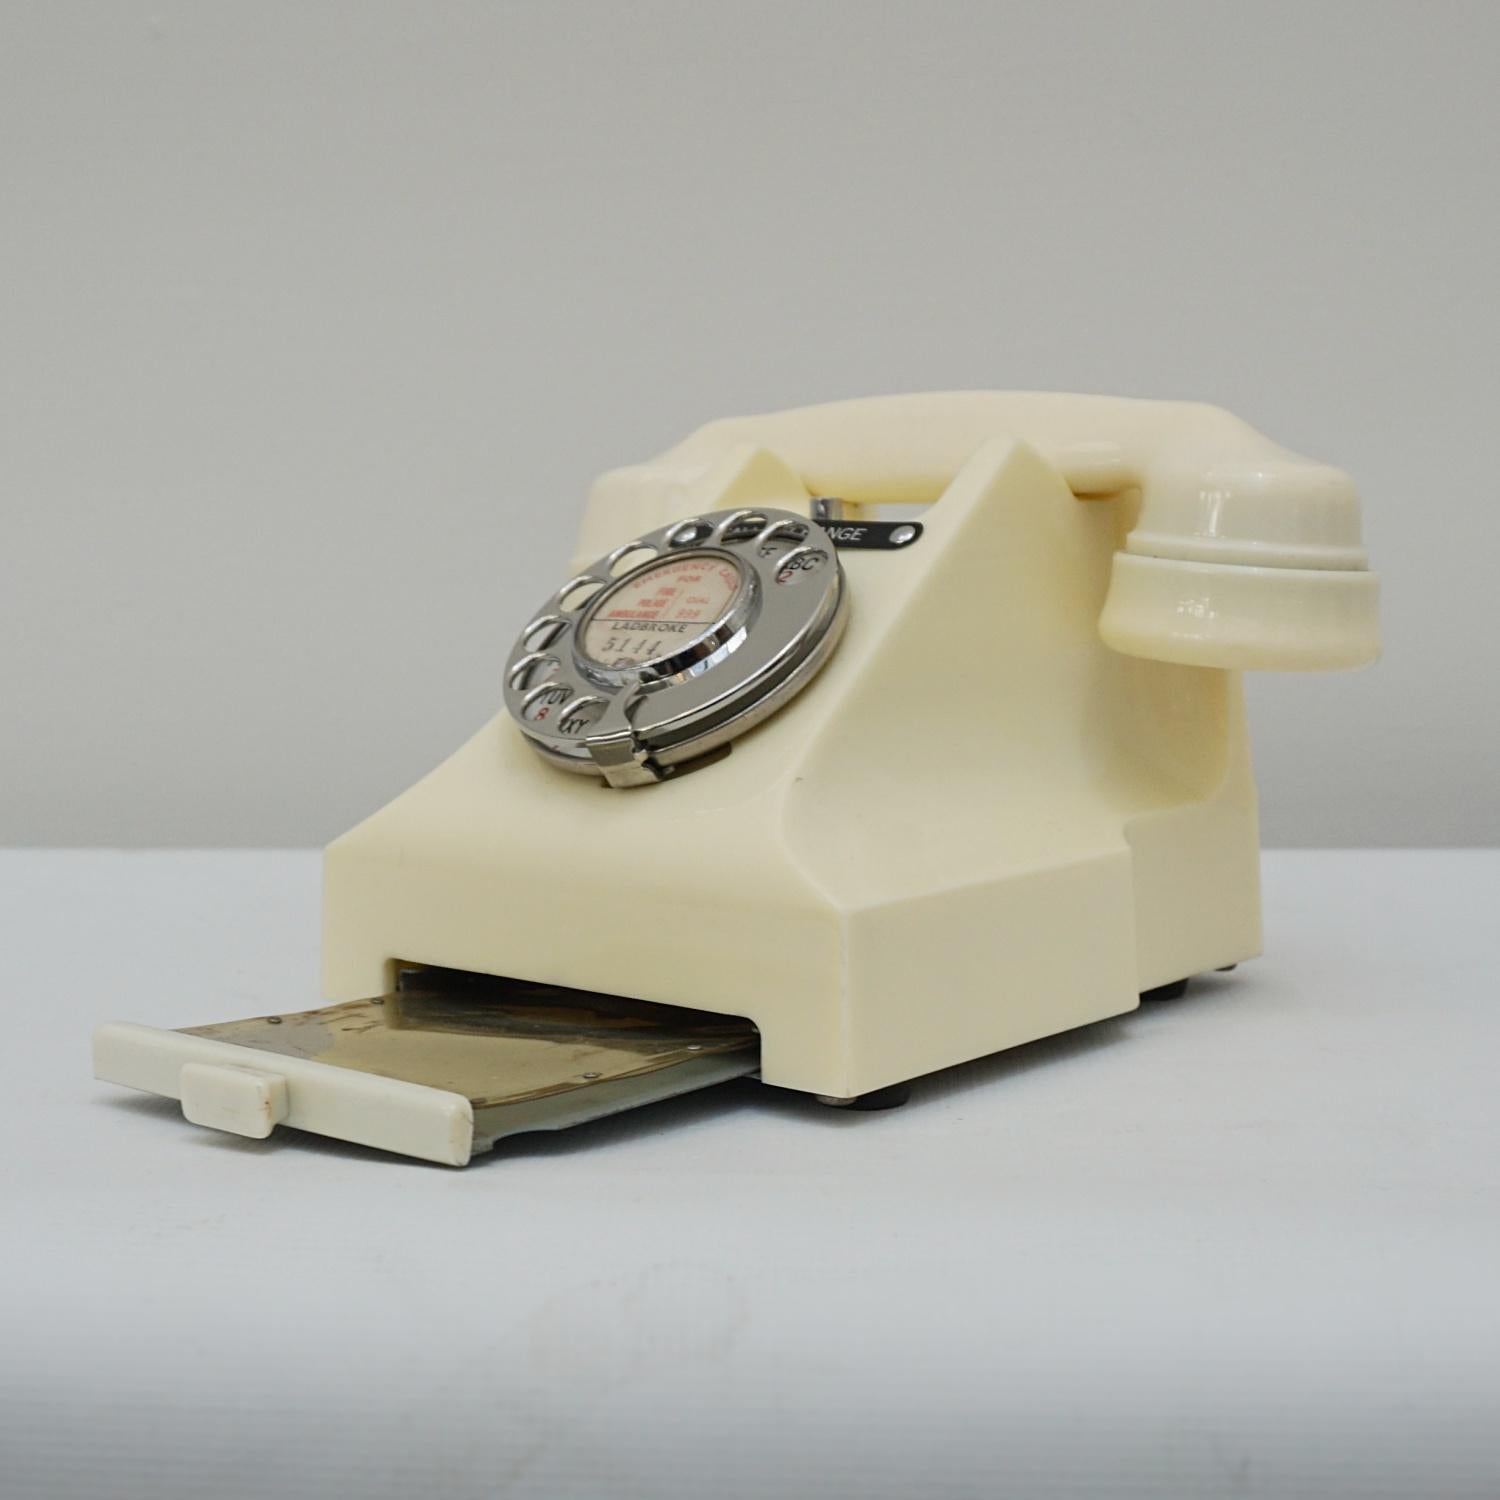 An original GPO model 332L Telephone. White bakelite with integral drawer and braided handset cord. Registered number to face and call exchange button. 

Dimensions: H 15cm, W 20cm, D 16cm

Origin: English

Date: 1956

Item No: